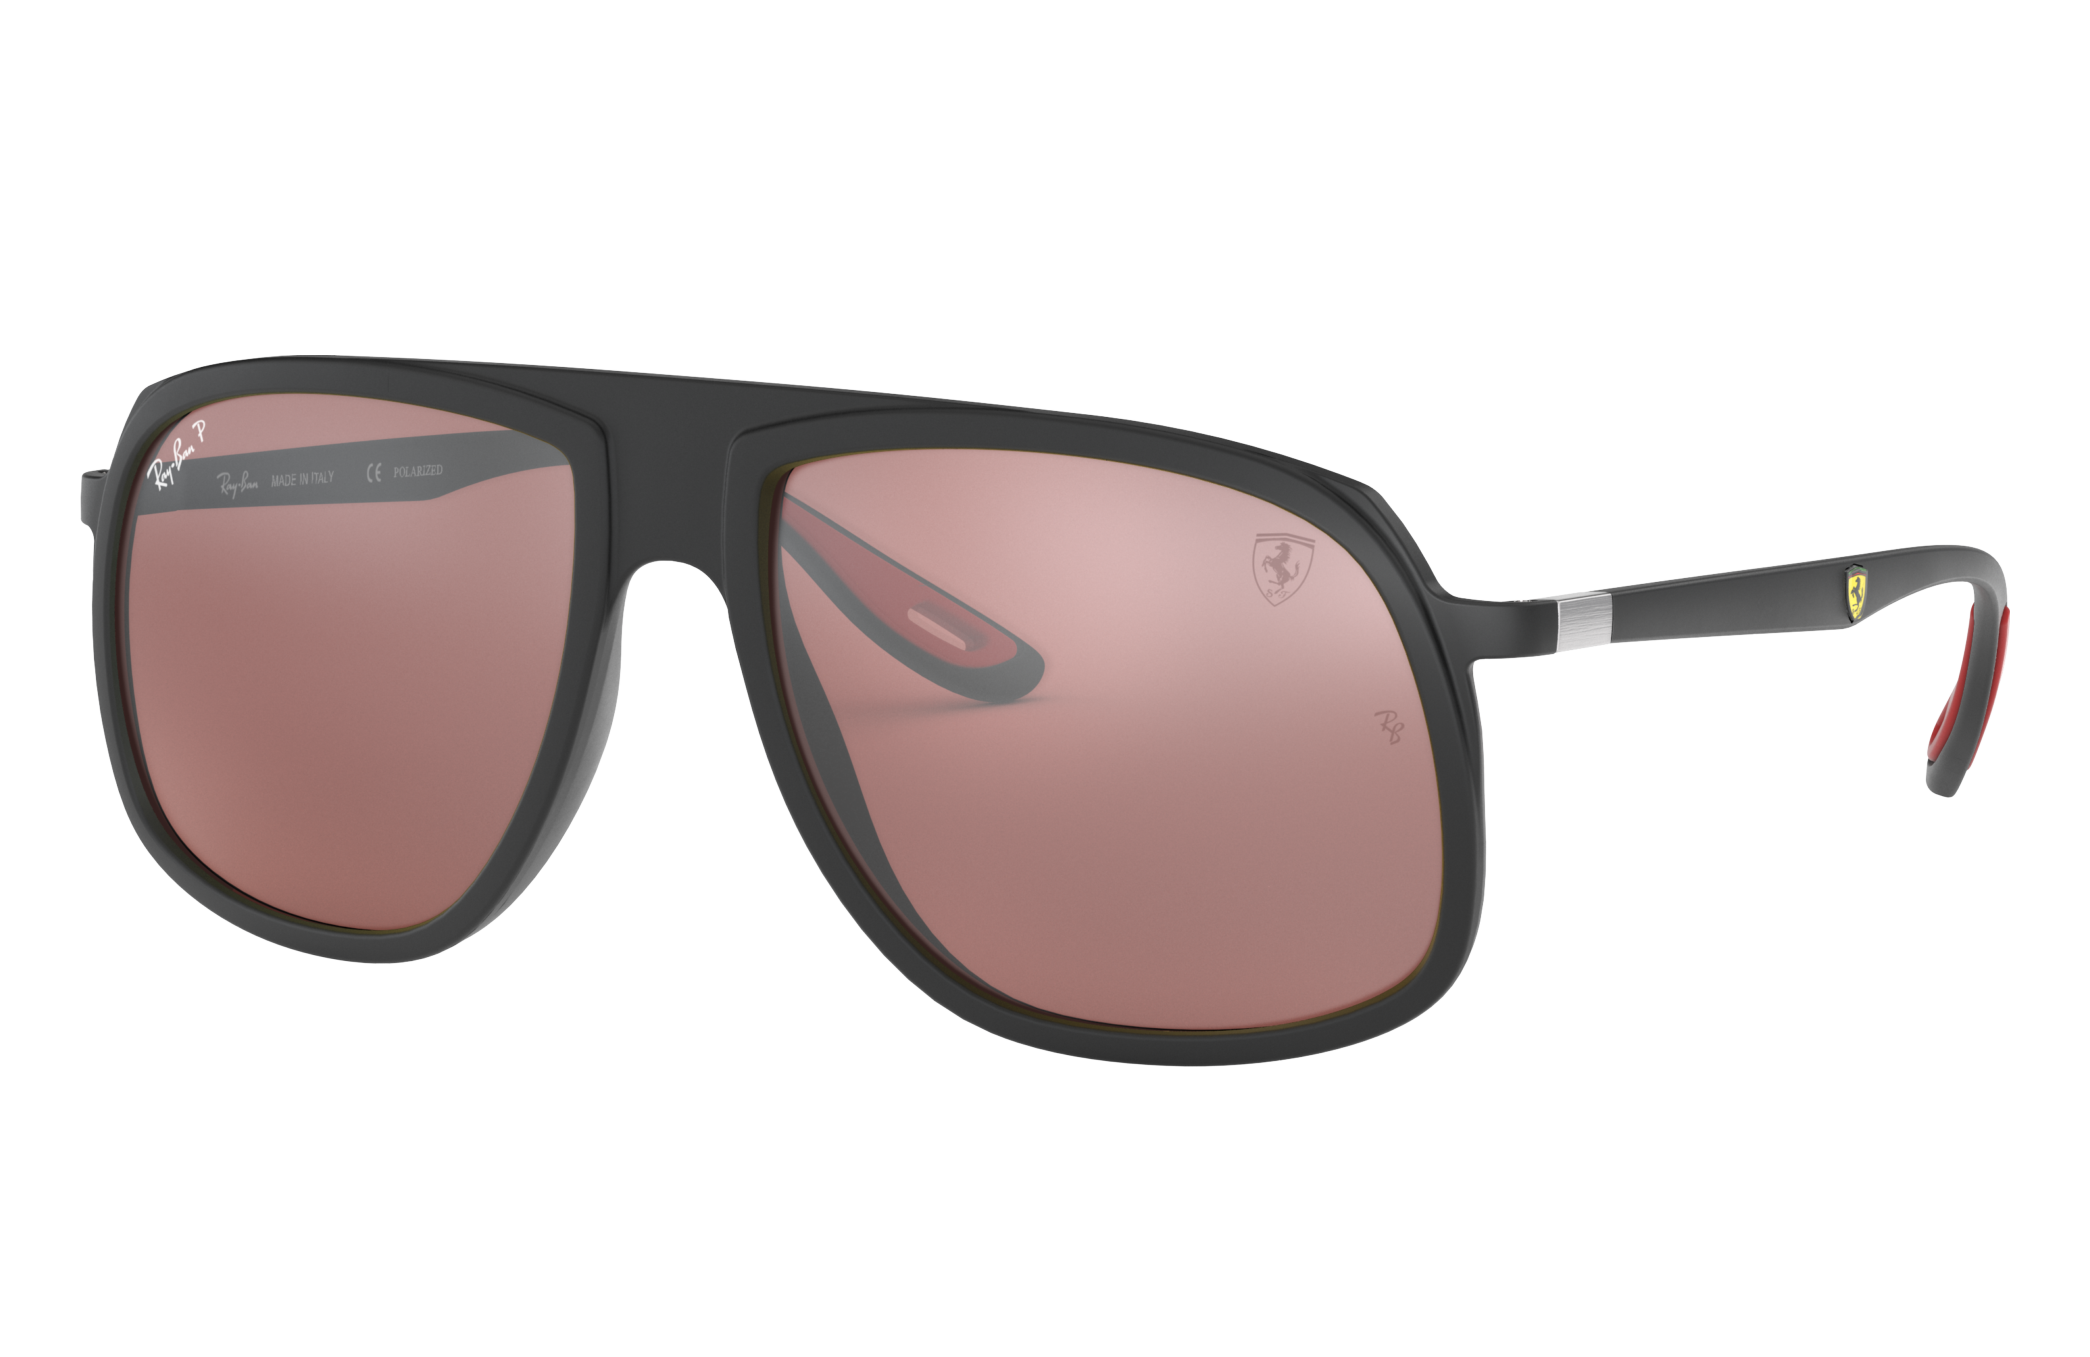 Overgang klem Imperial Rb4308m Scuderia Ferrari Collection Sunglasses in Black and Silver | Ray-Ban ®